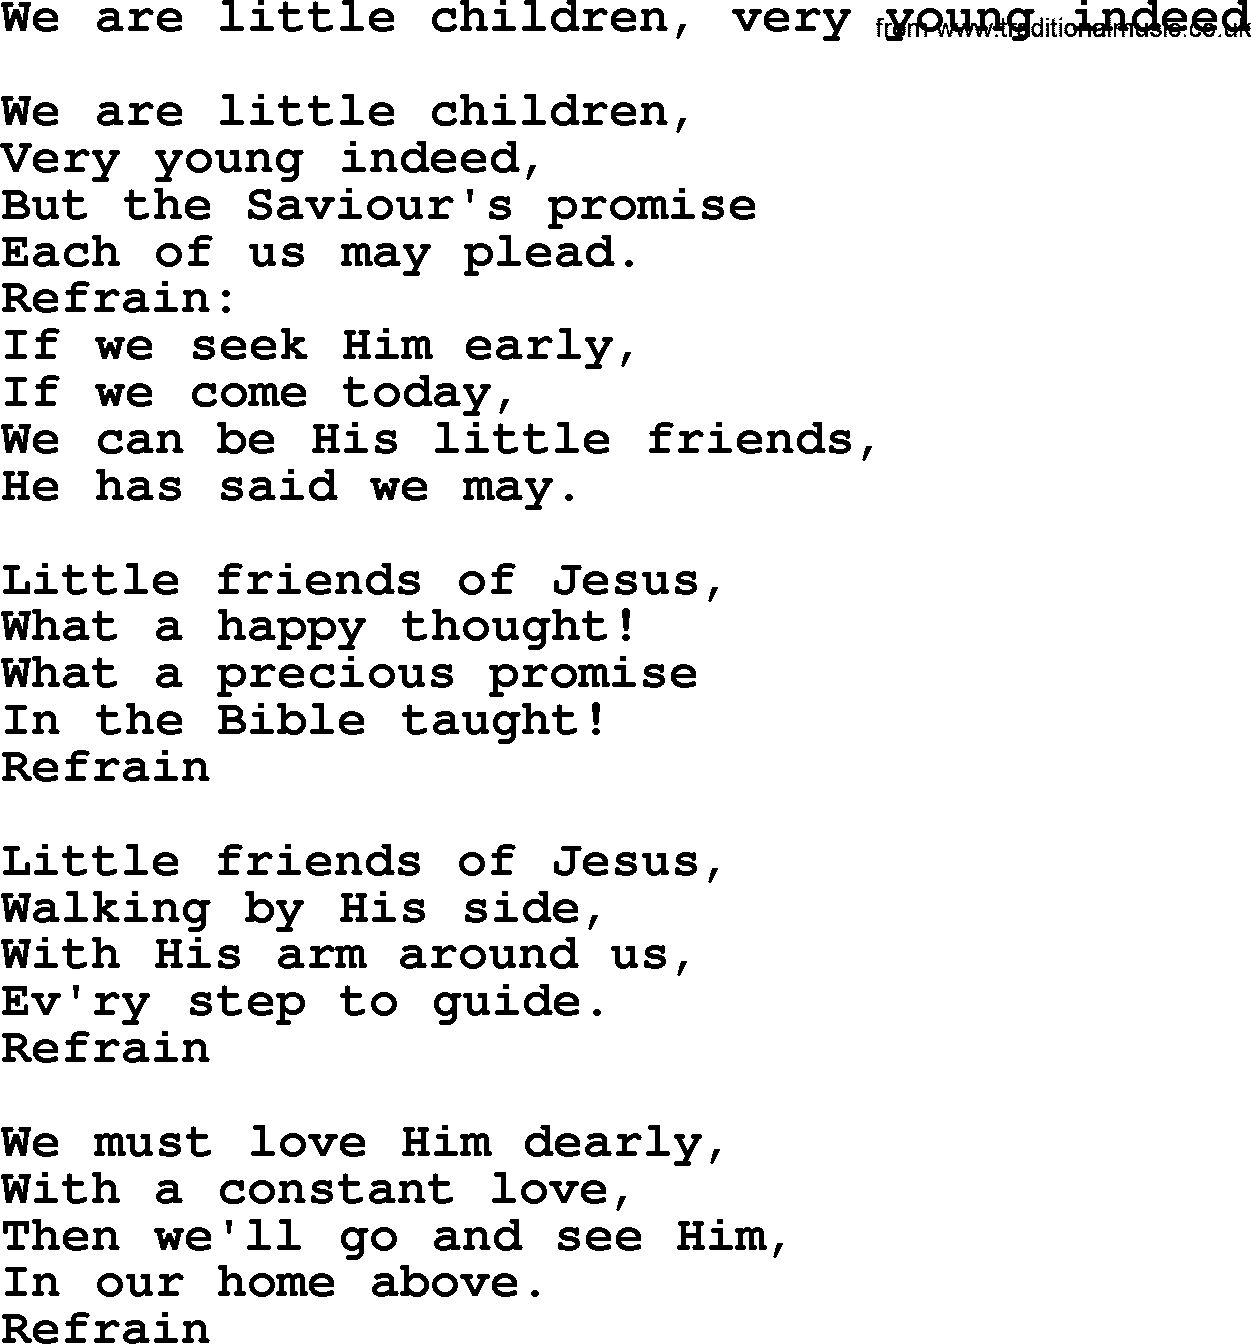 Christmas Hymns, Carols and Songs, title: We Are Little Children, Very Young Indeed, lyrics with PDF